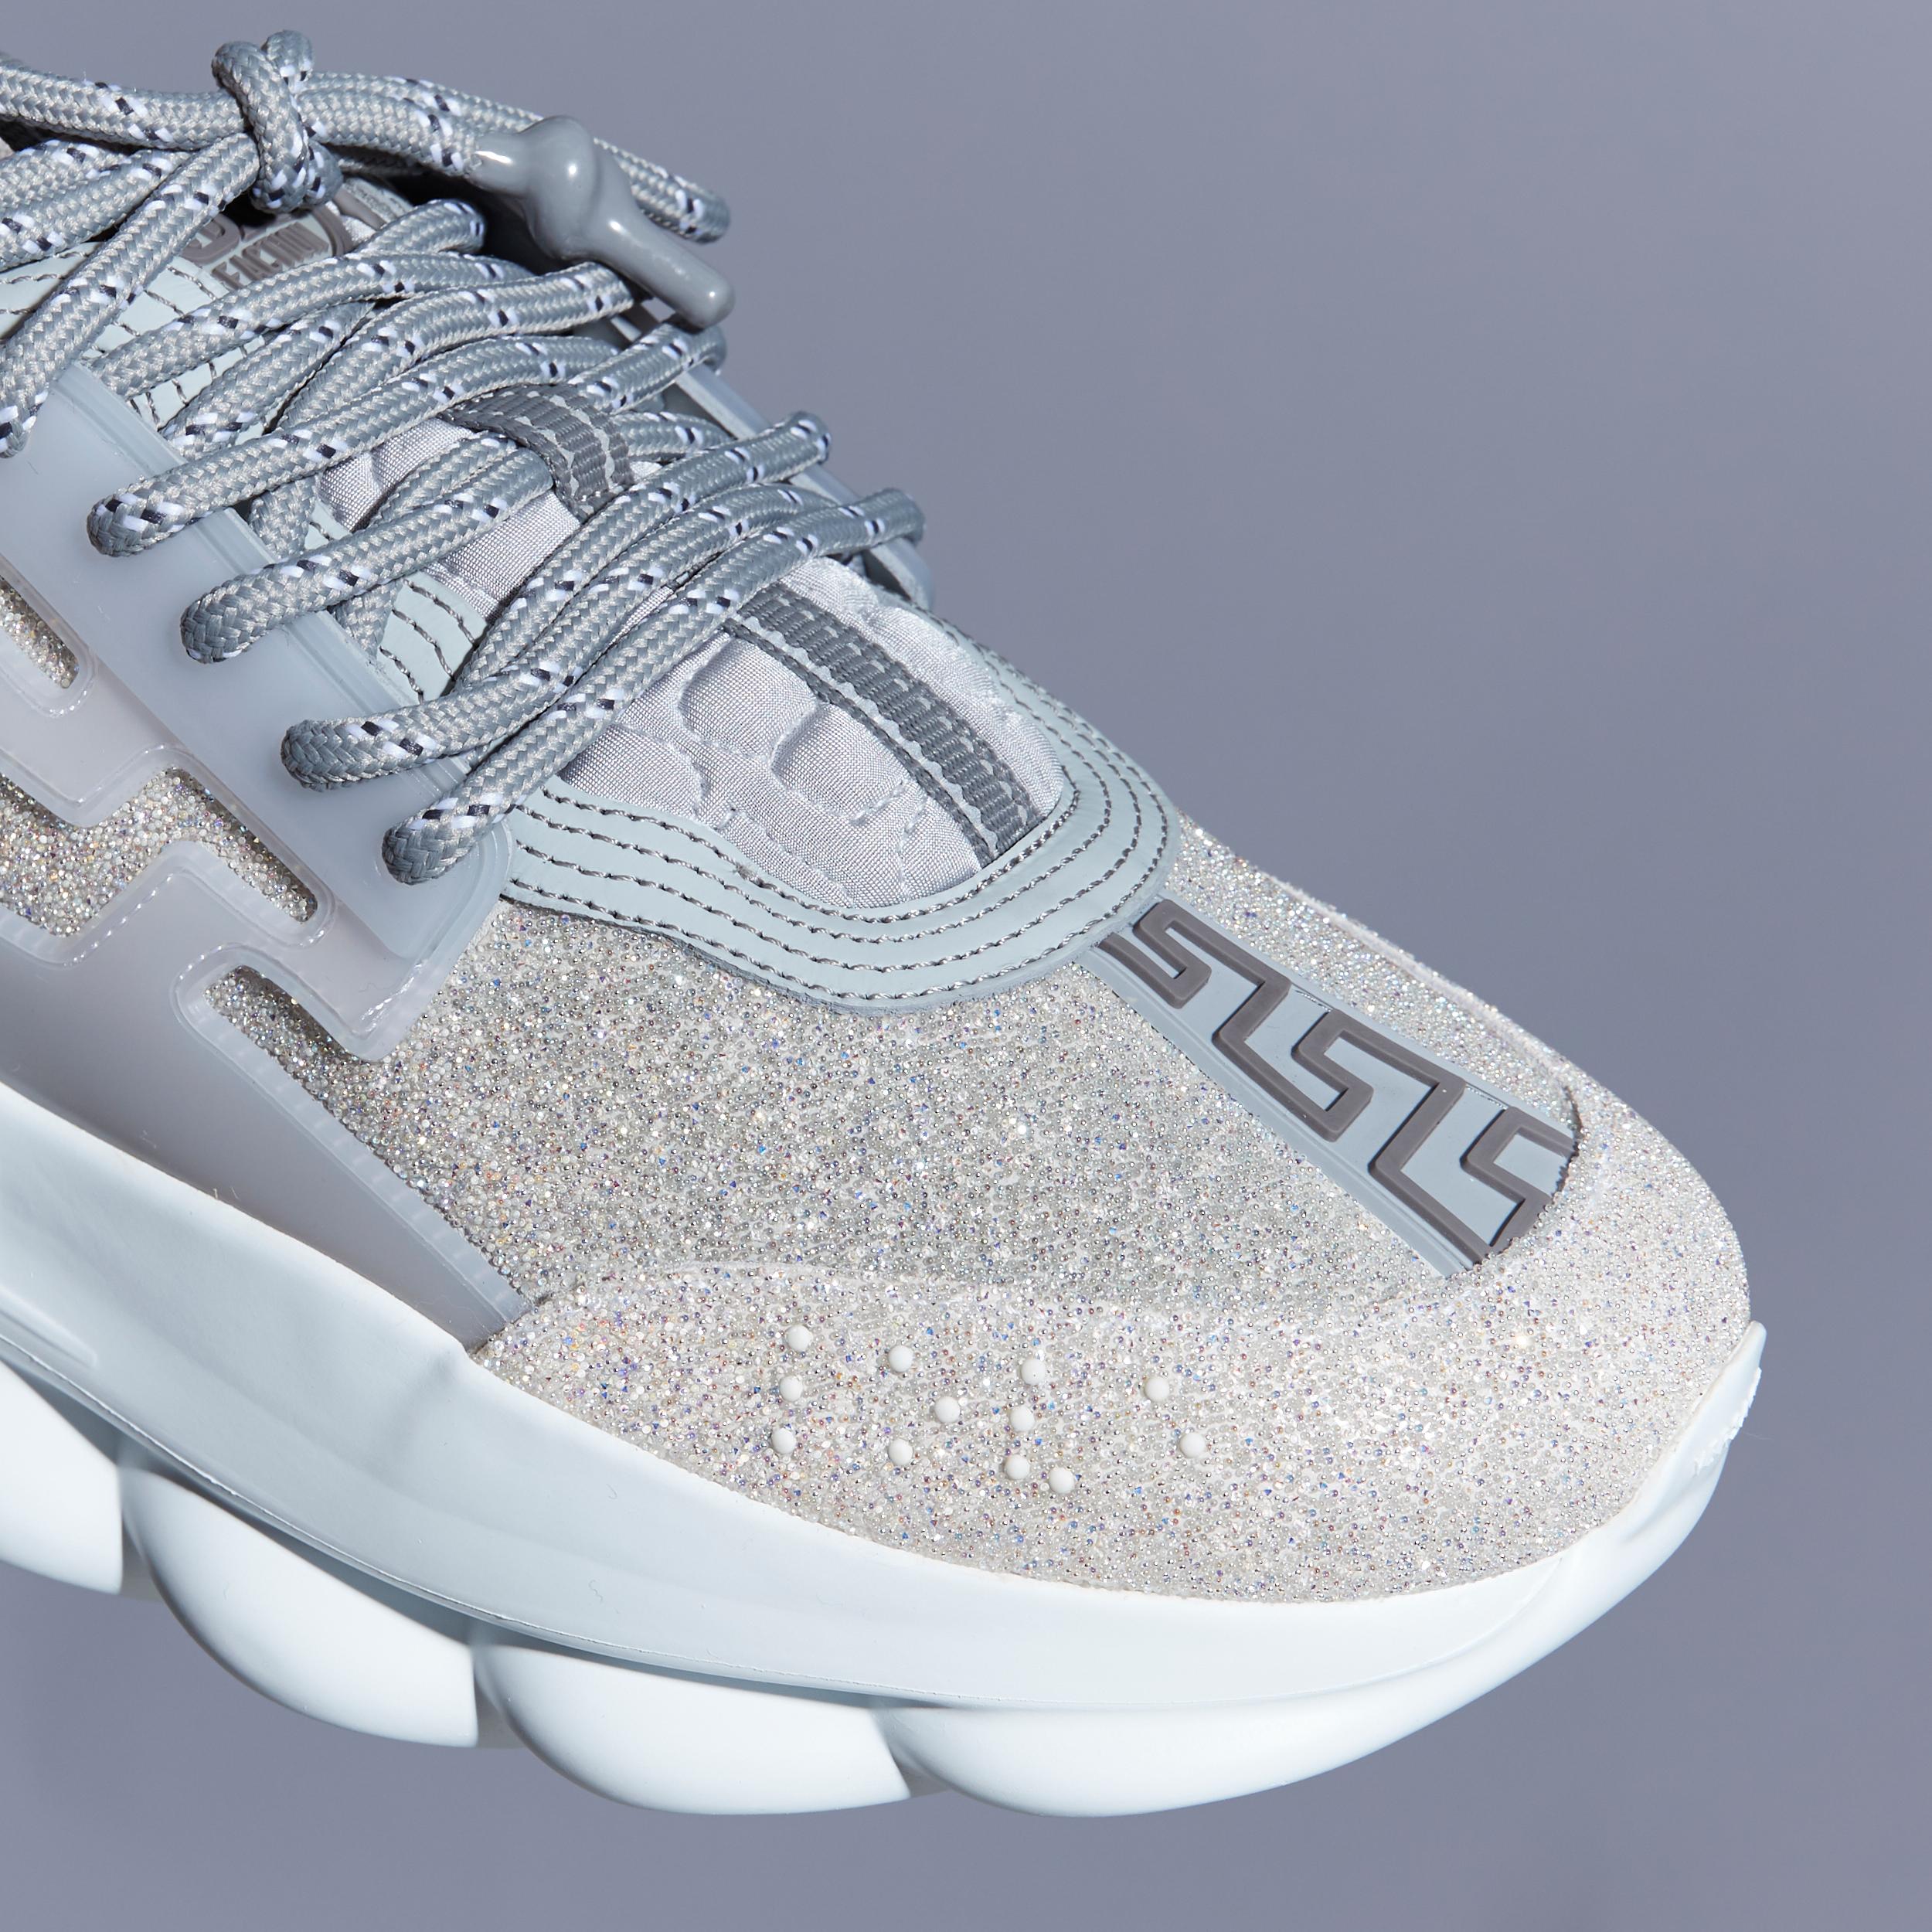 new VERSACE Chain Reaction Reflective Silver Crystal Rhinestone sneaker EU41 US8 For Sale 4